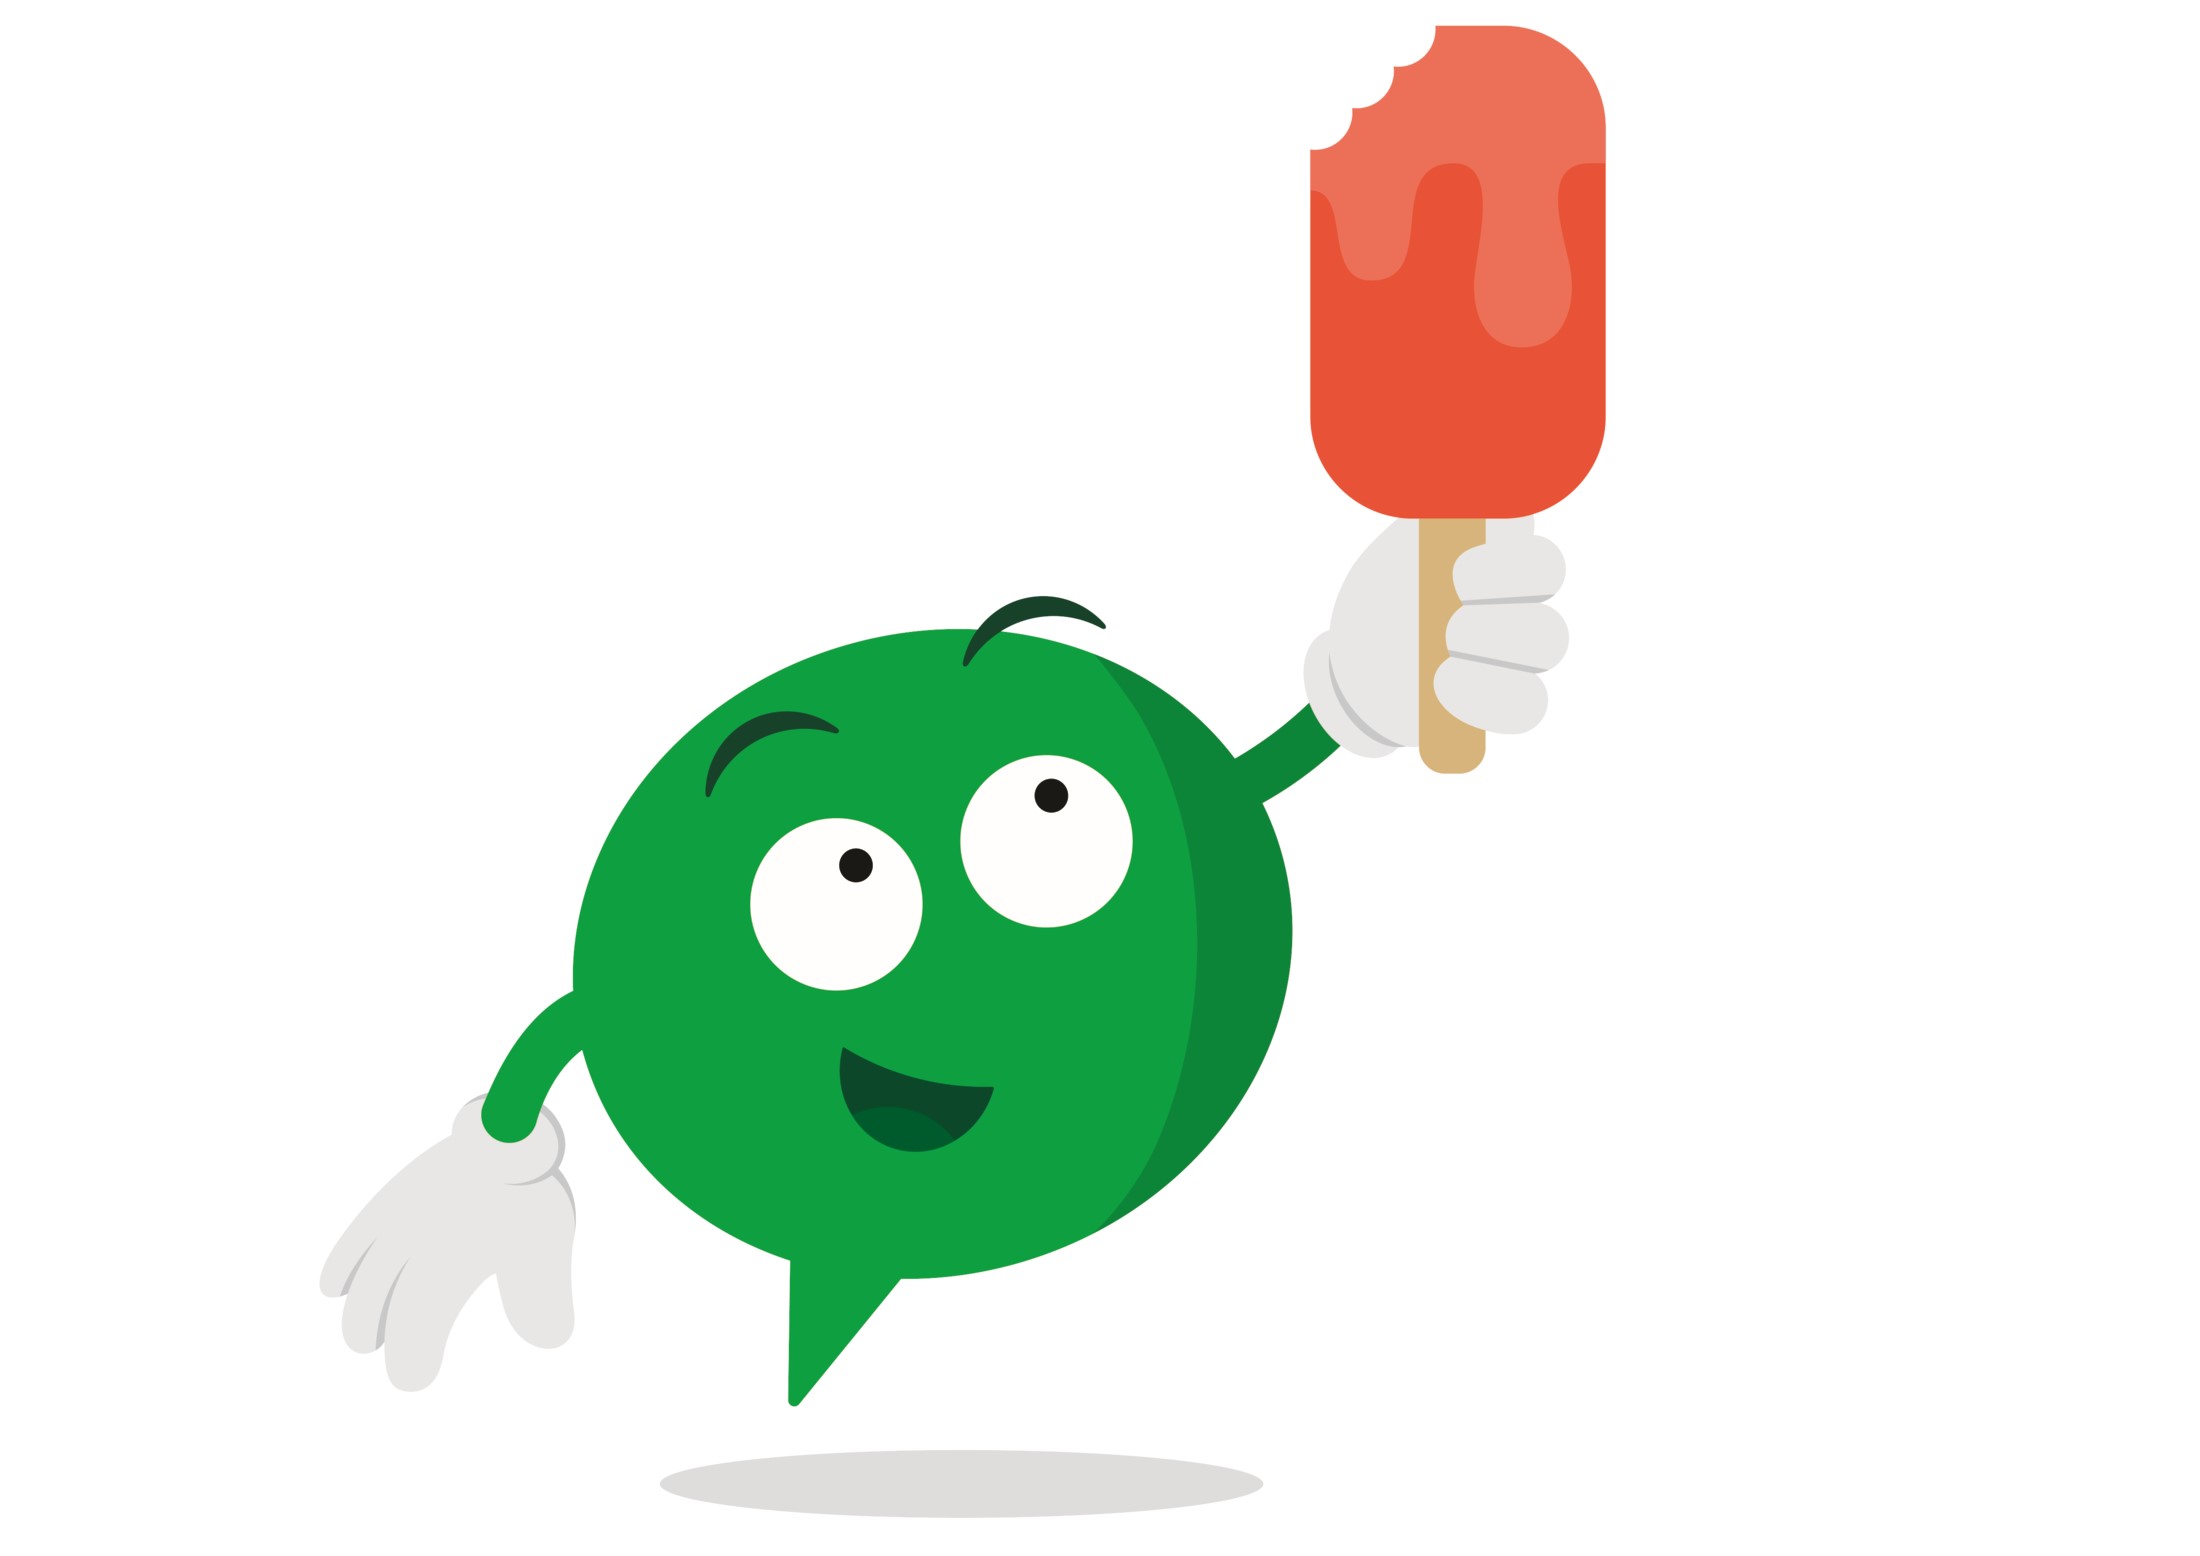 Buddy holding an ice lolly